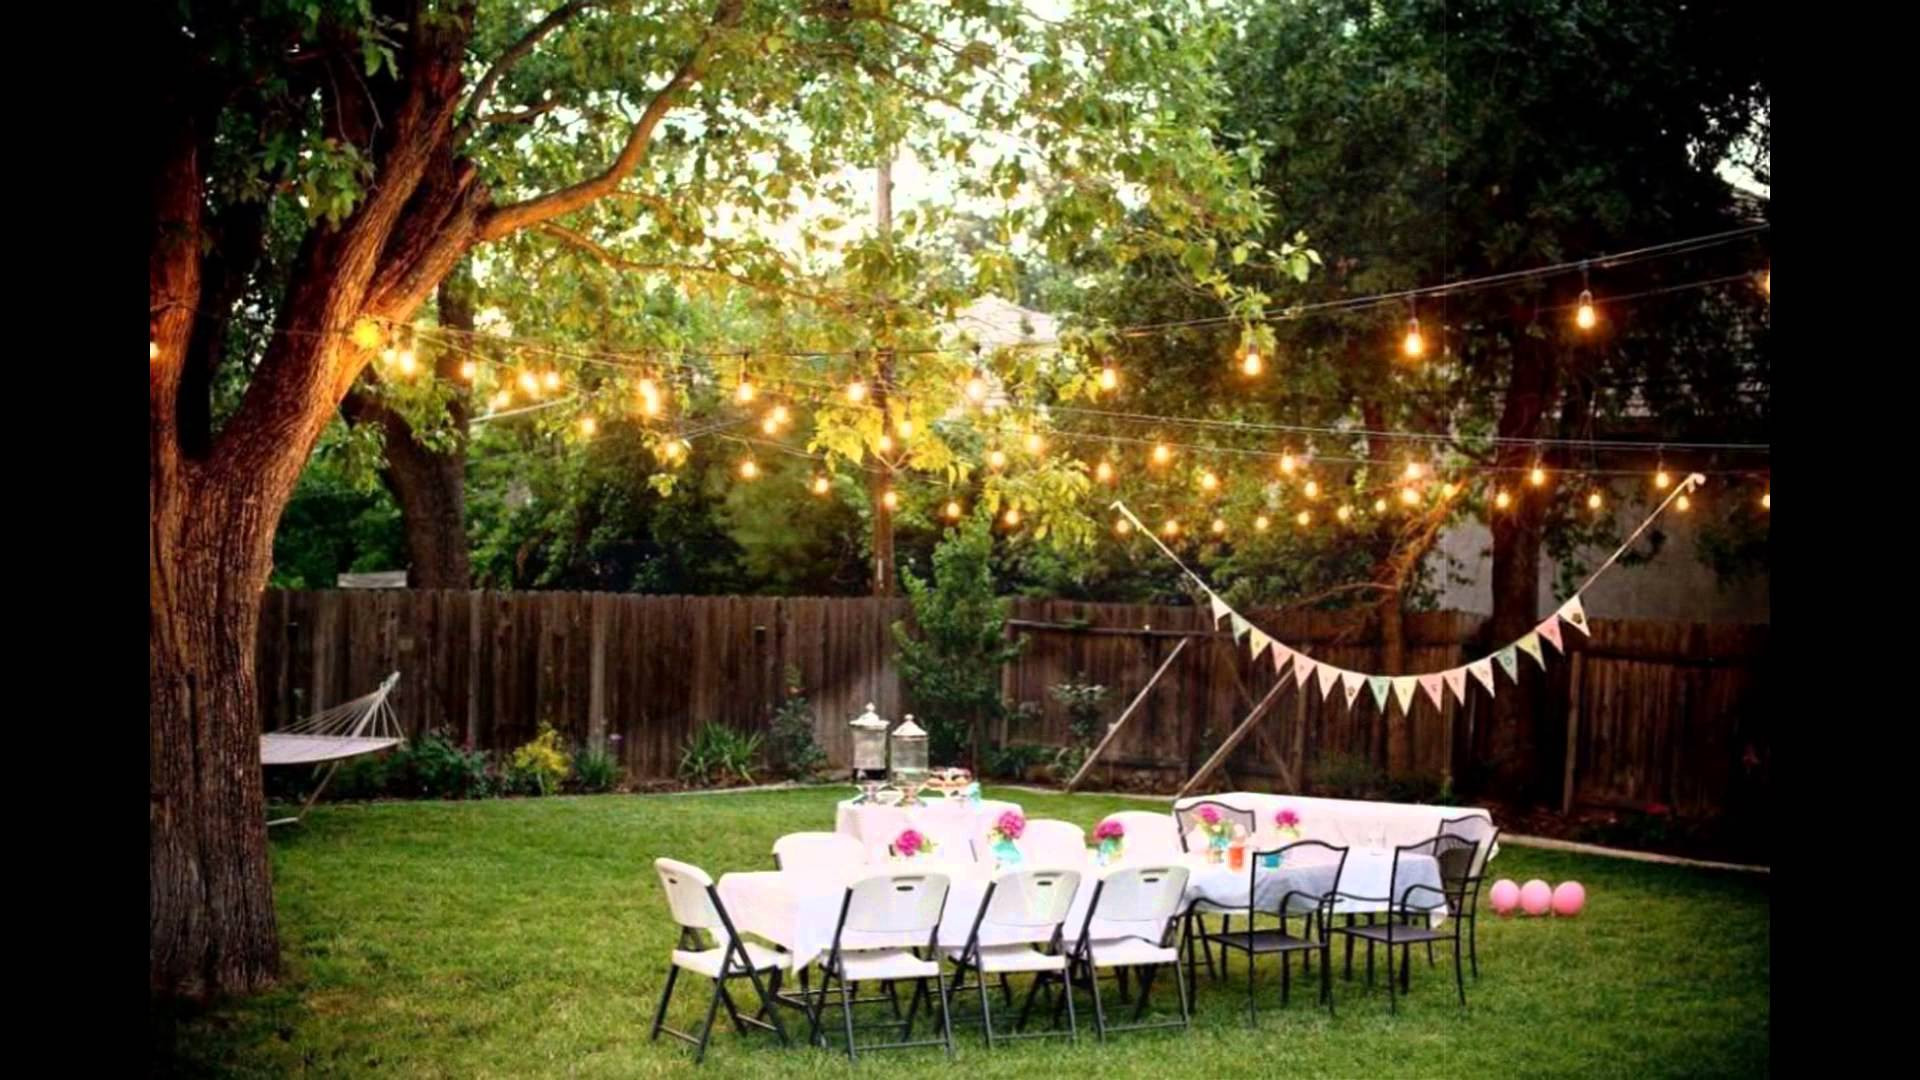 Ideas To Decorate Backyard For Engagement Party
 Wedding Trends Archives Chicago Wedding Blog